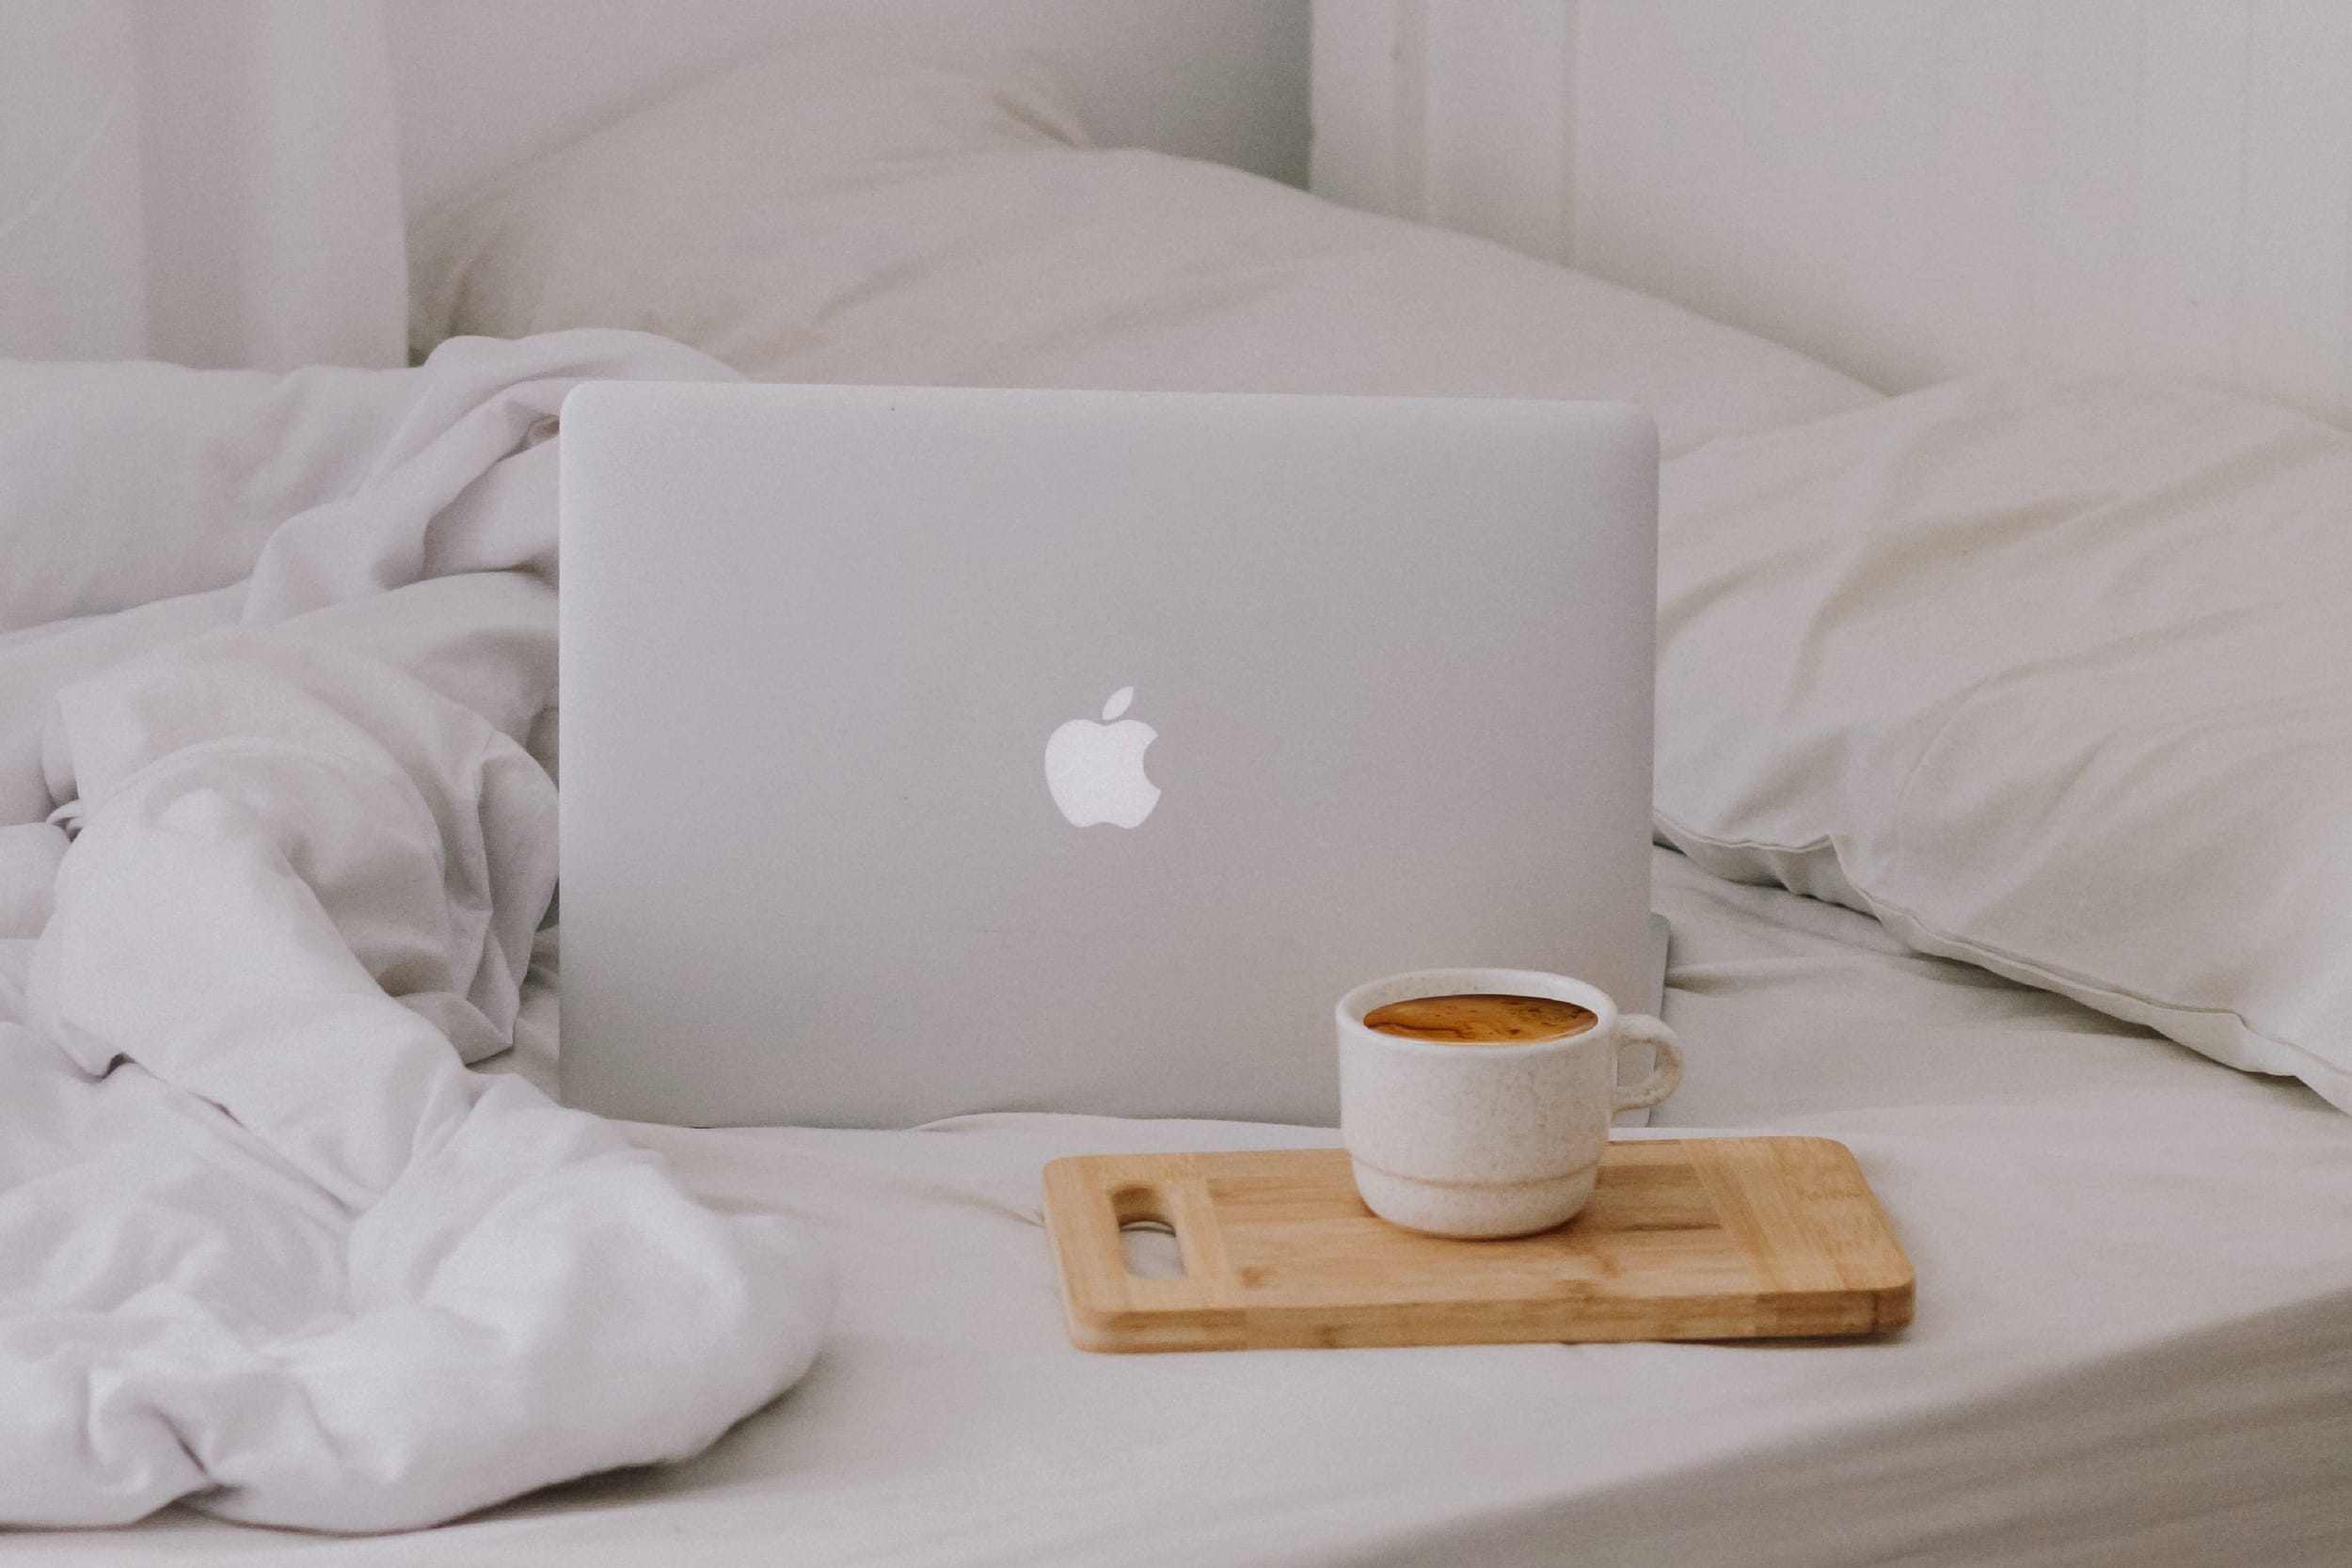 A MacBook resting on a bed with a hot drink.